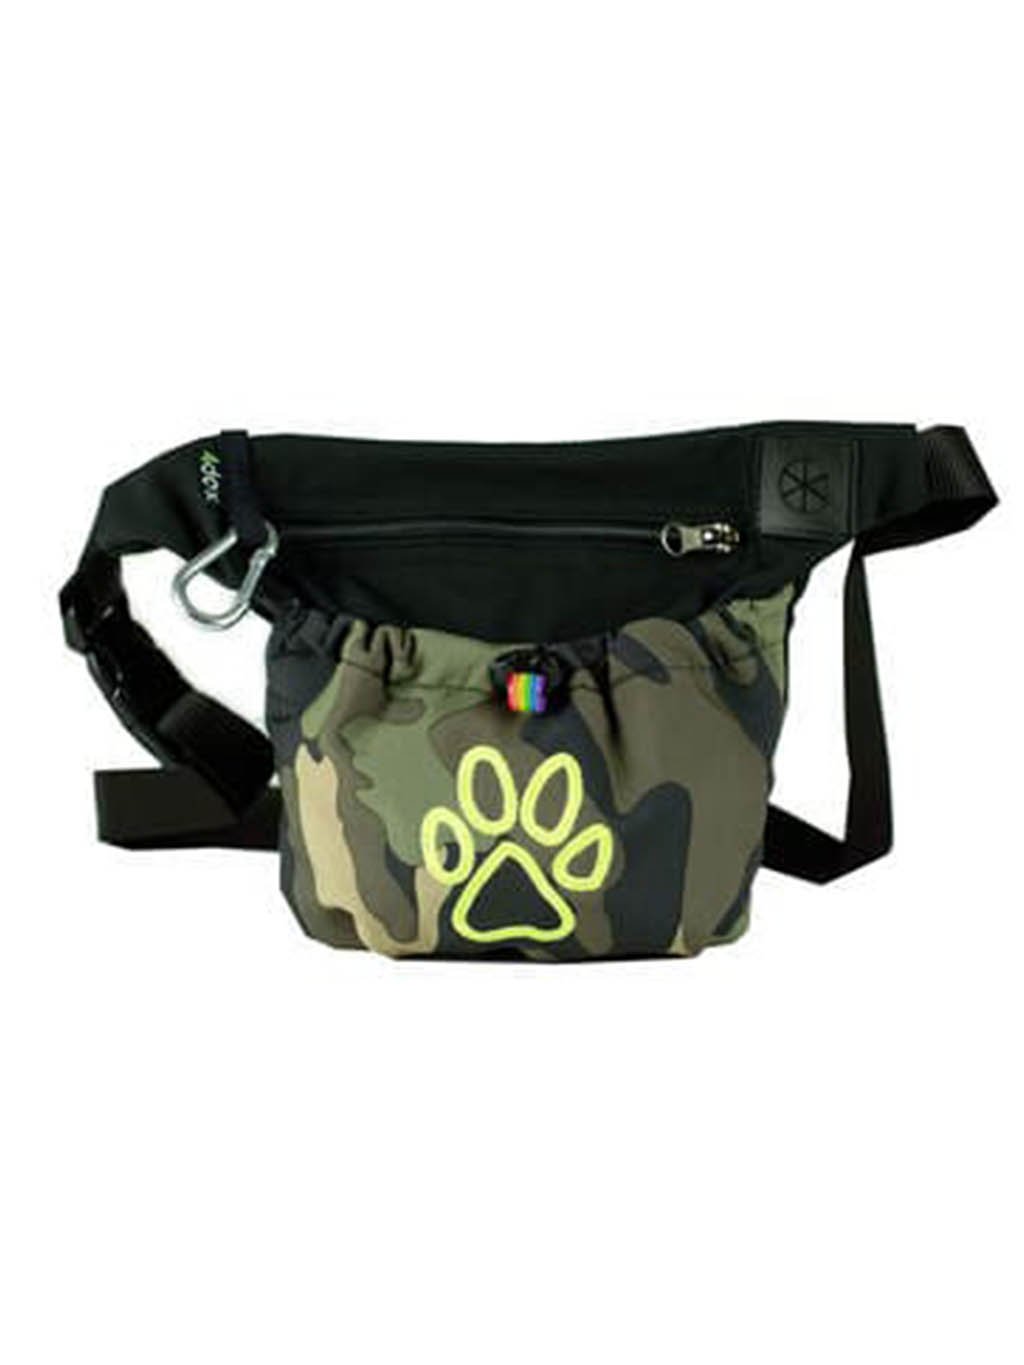 Dog training treat pouch 2 in 1 camouflage-black "extra" No. 2